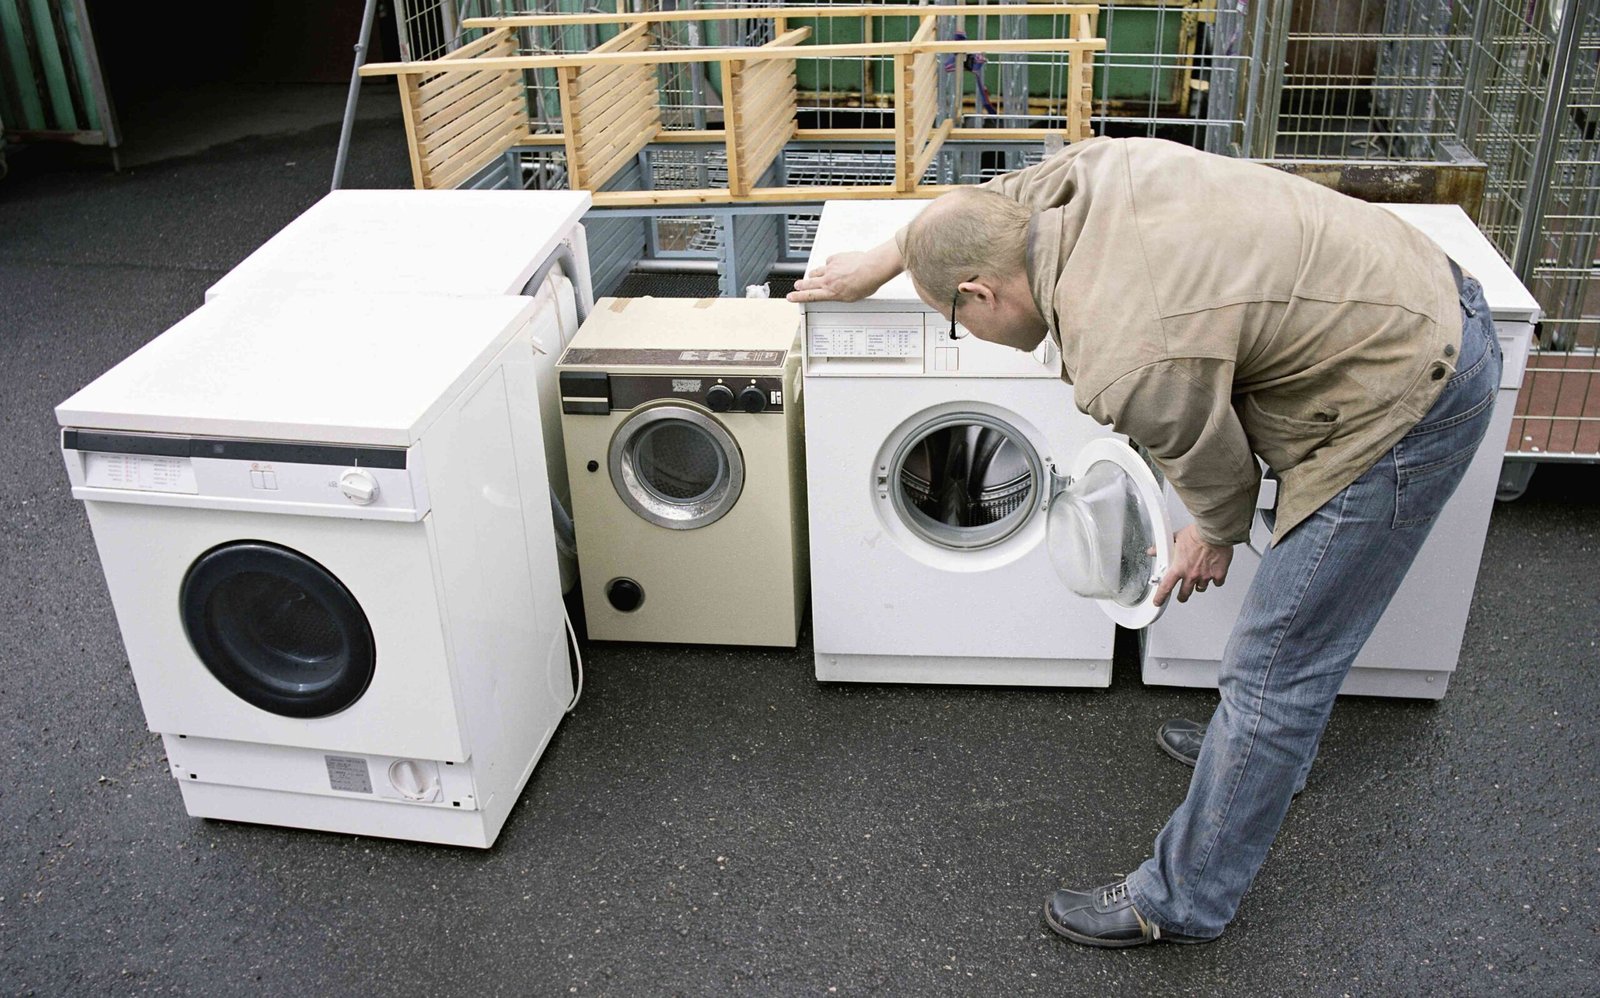 A man looking at the Broken Appliances